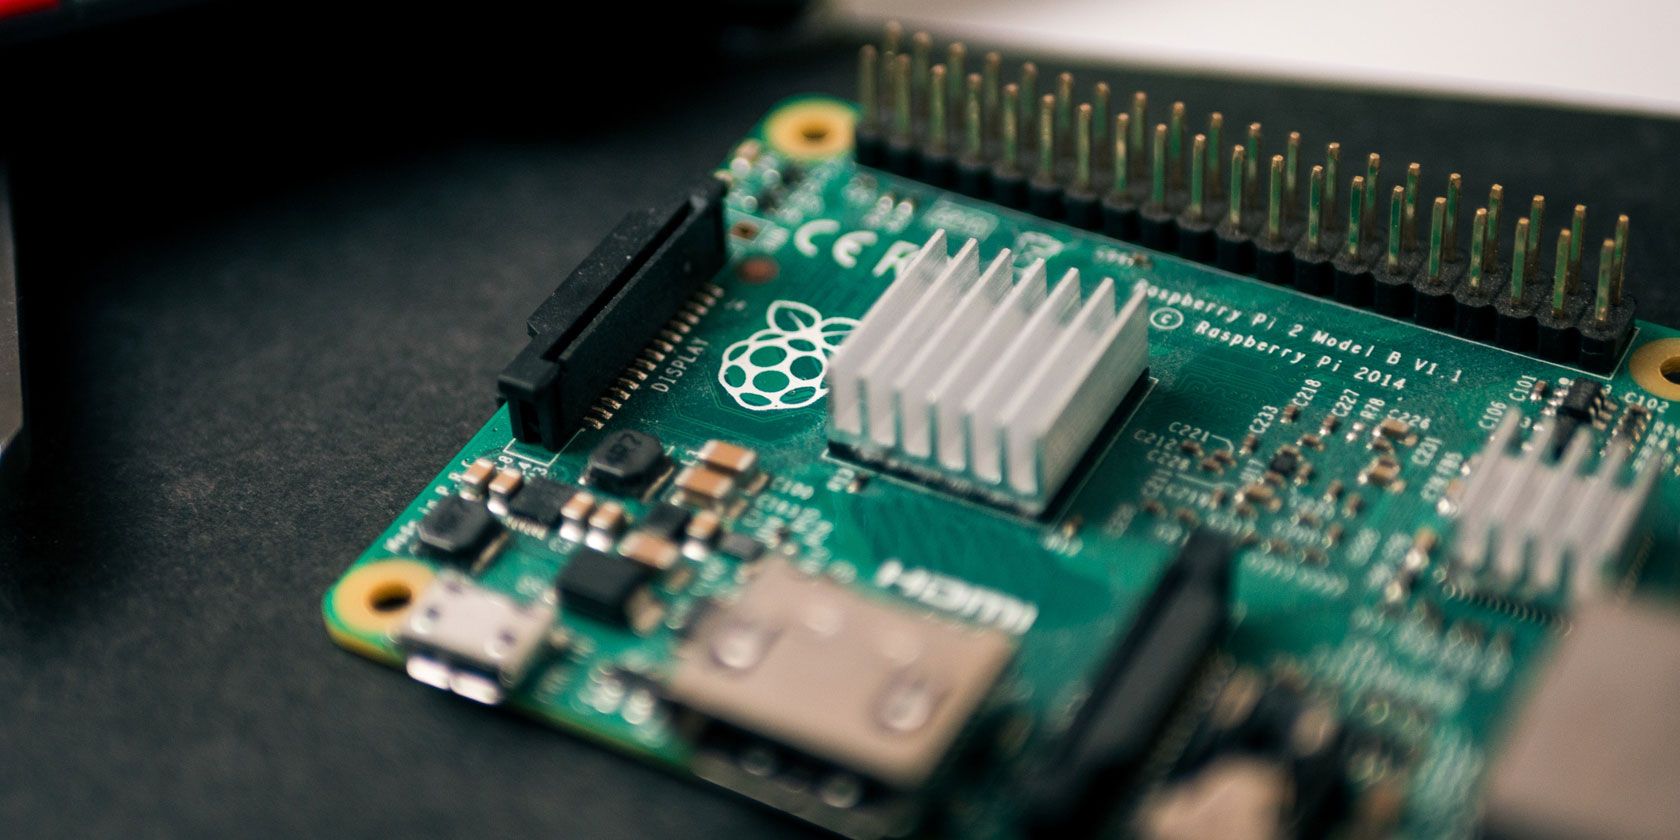 getting started with raspberry pi